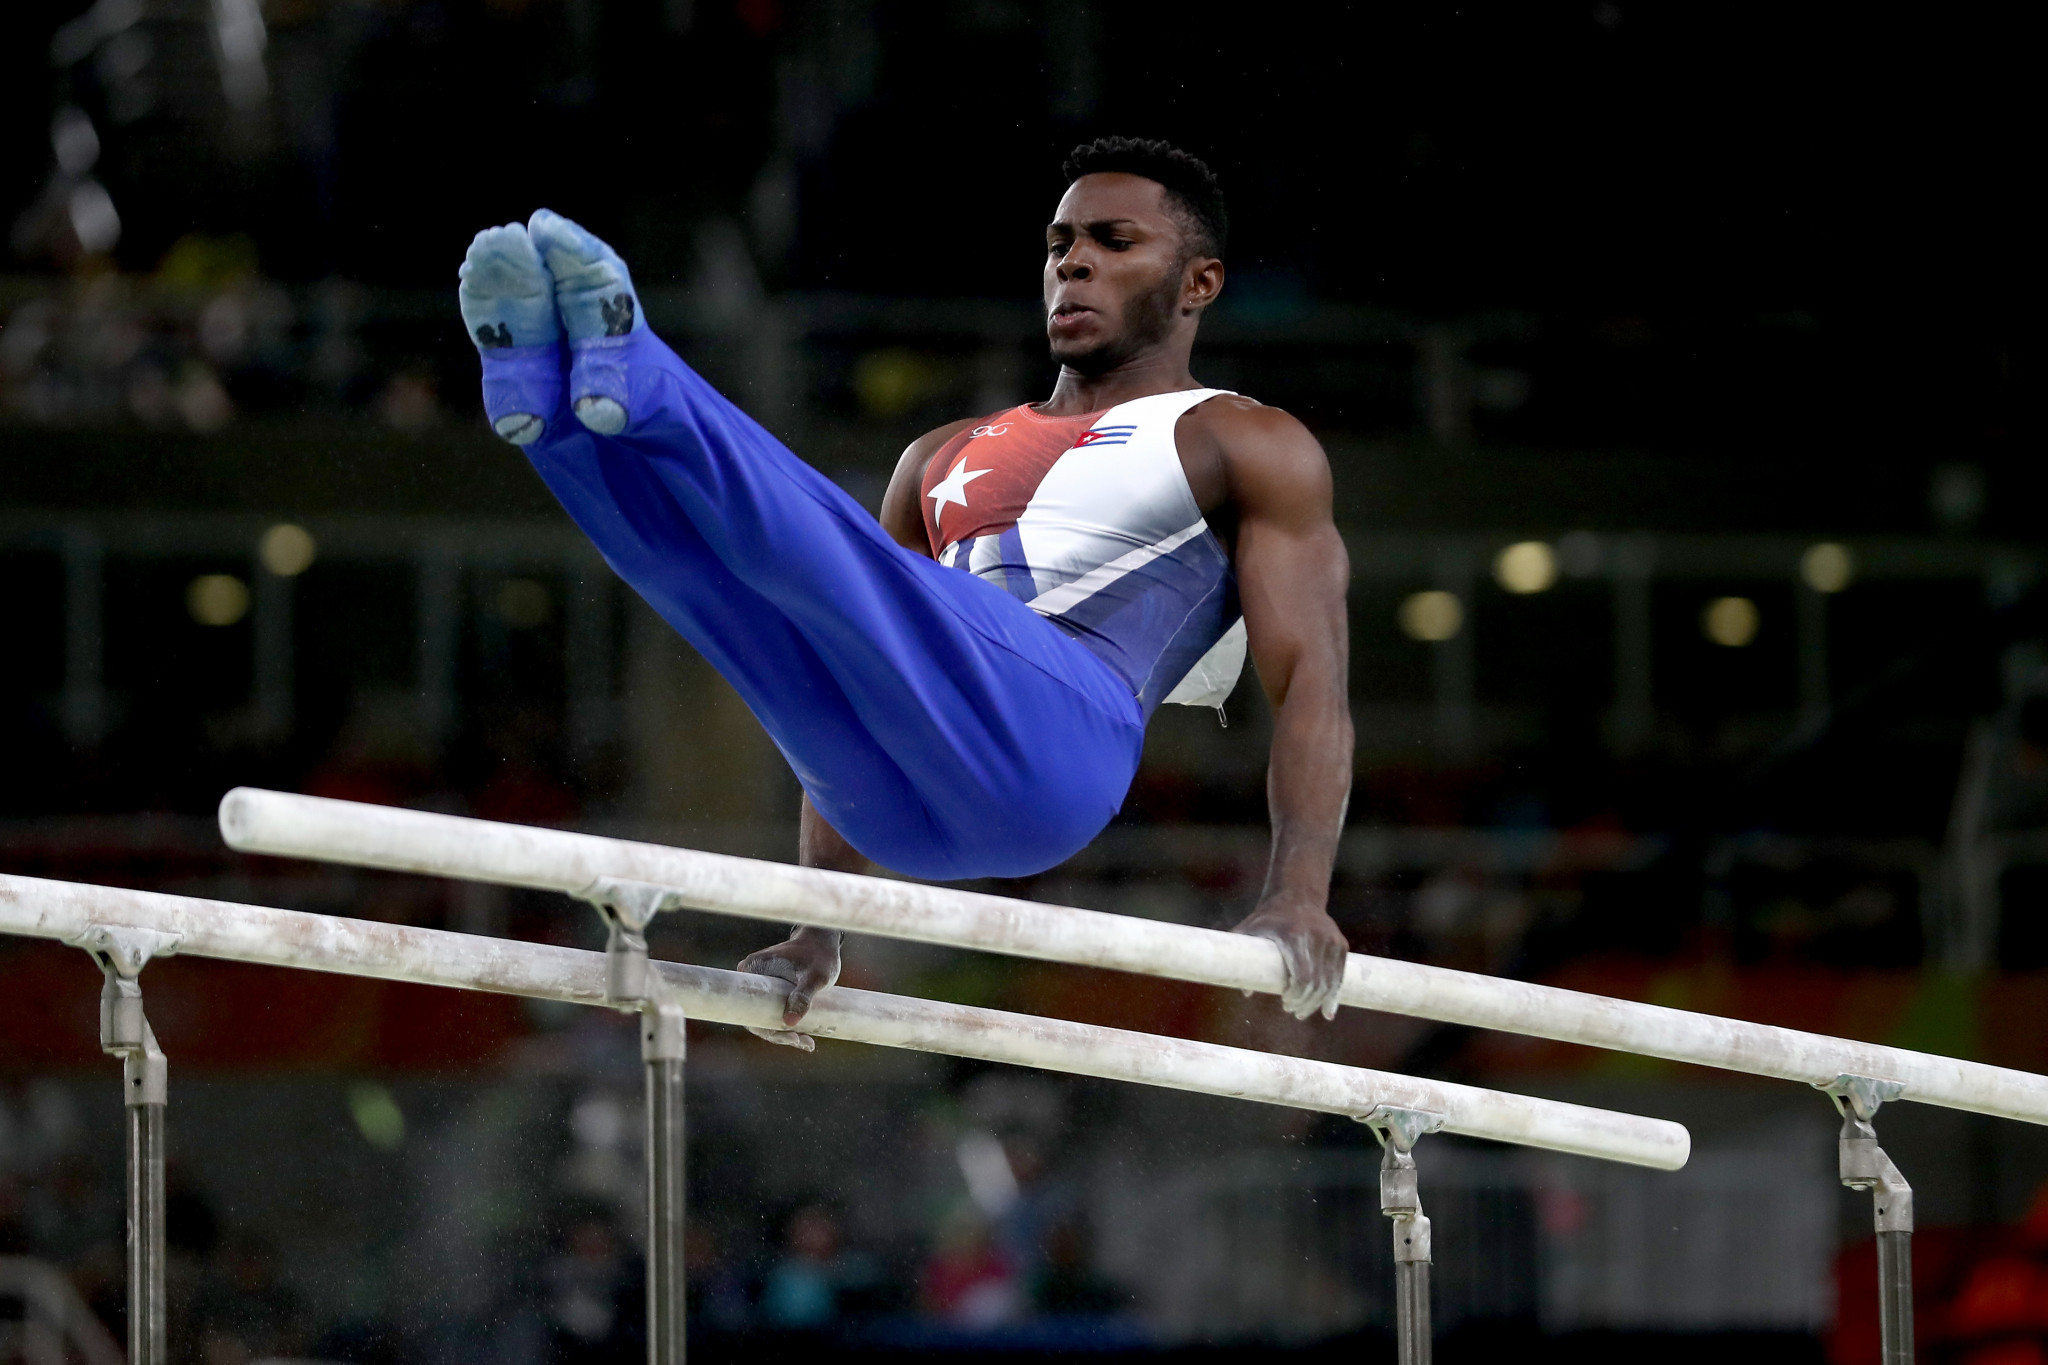 Cuba’s Manrique Larduet won the men’s vault and parallel bars events to increase his gold medal tally to three on the final day of the FIG World Challenge Cup in Guimarães in Portugal ©Getty Images